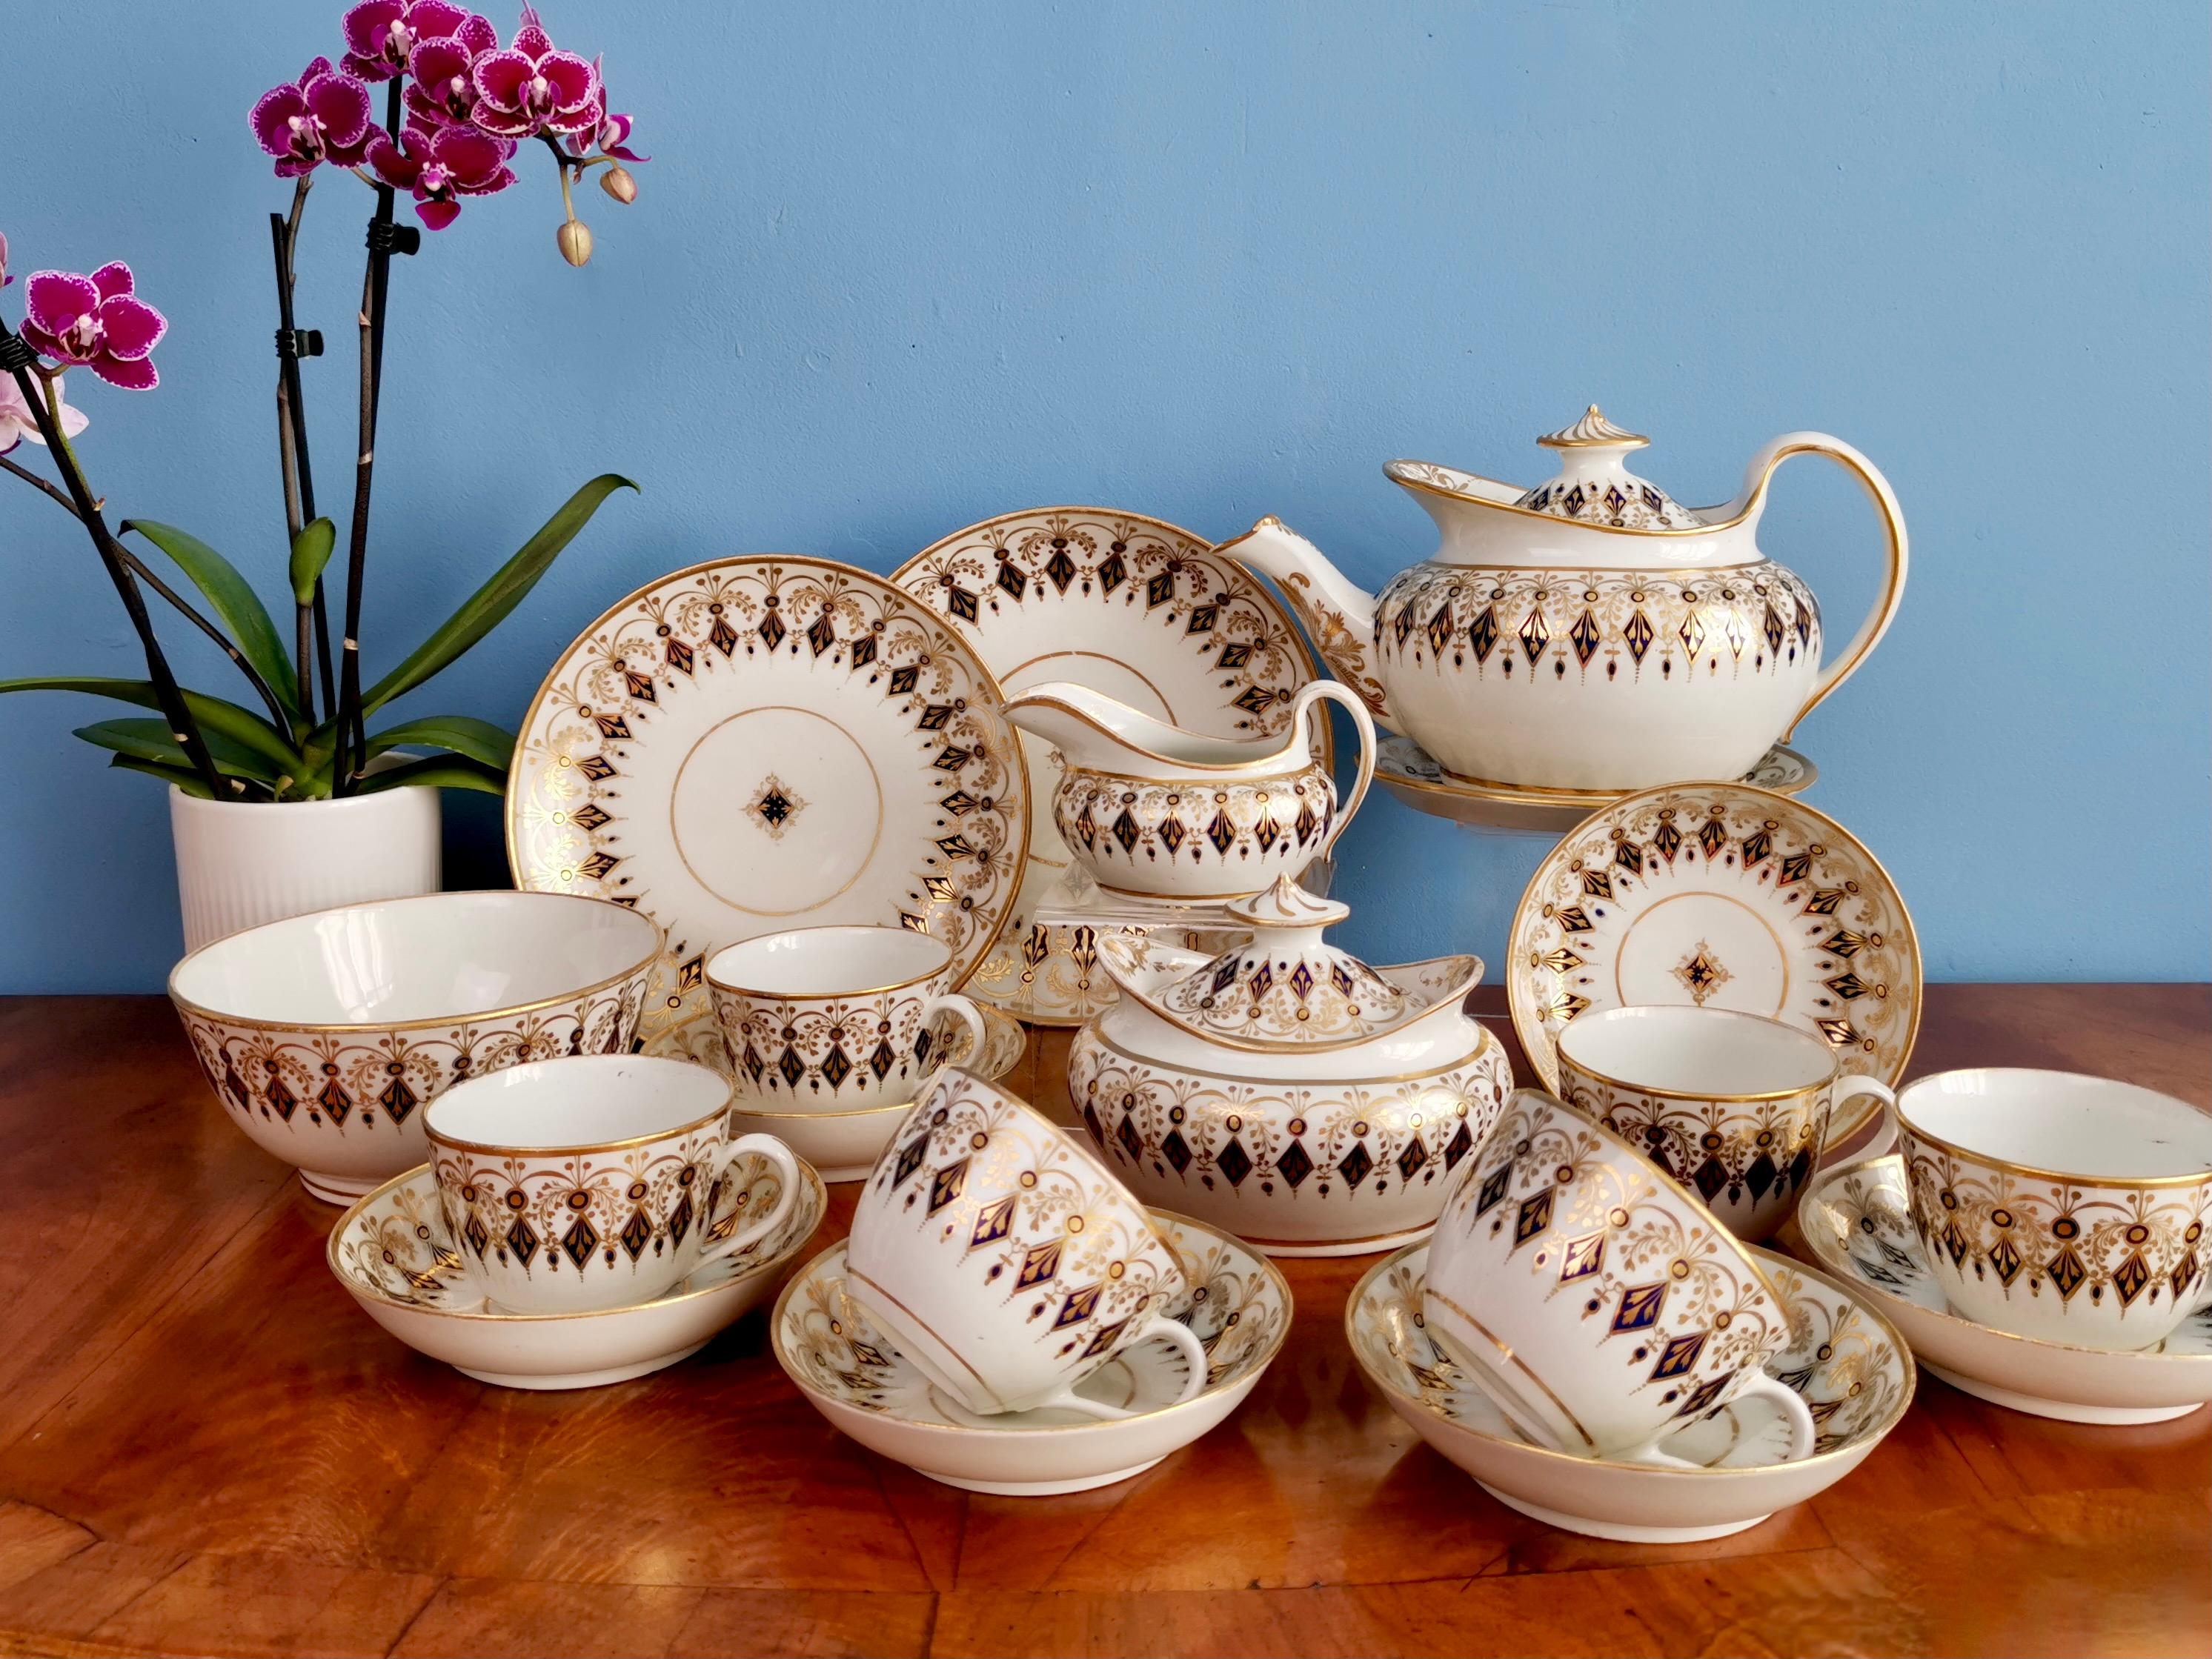 This is spectacular full tea service made by New Hall around the year 1810. The service consists of a lidded teapot on a stand, a lidded sucrier, a milk jug, six teacups and saucers, two large cake plates of slightly different sizes, and a slop